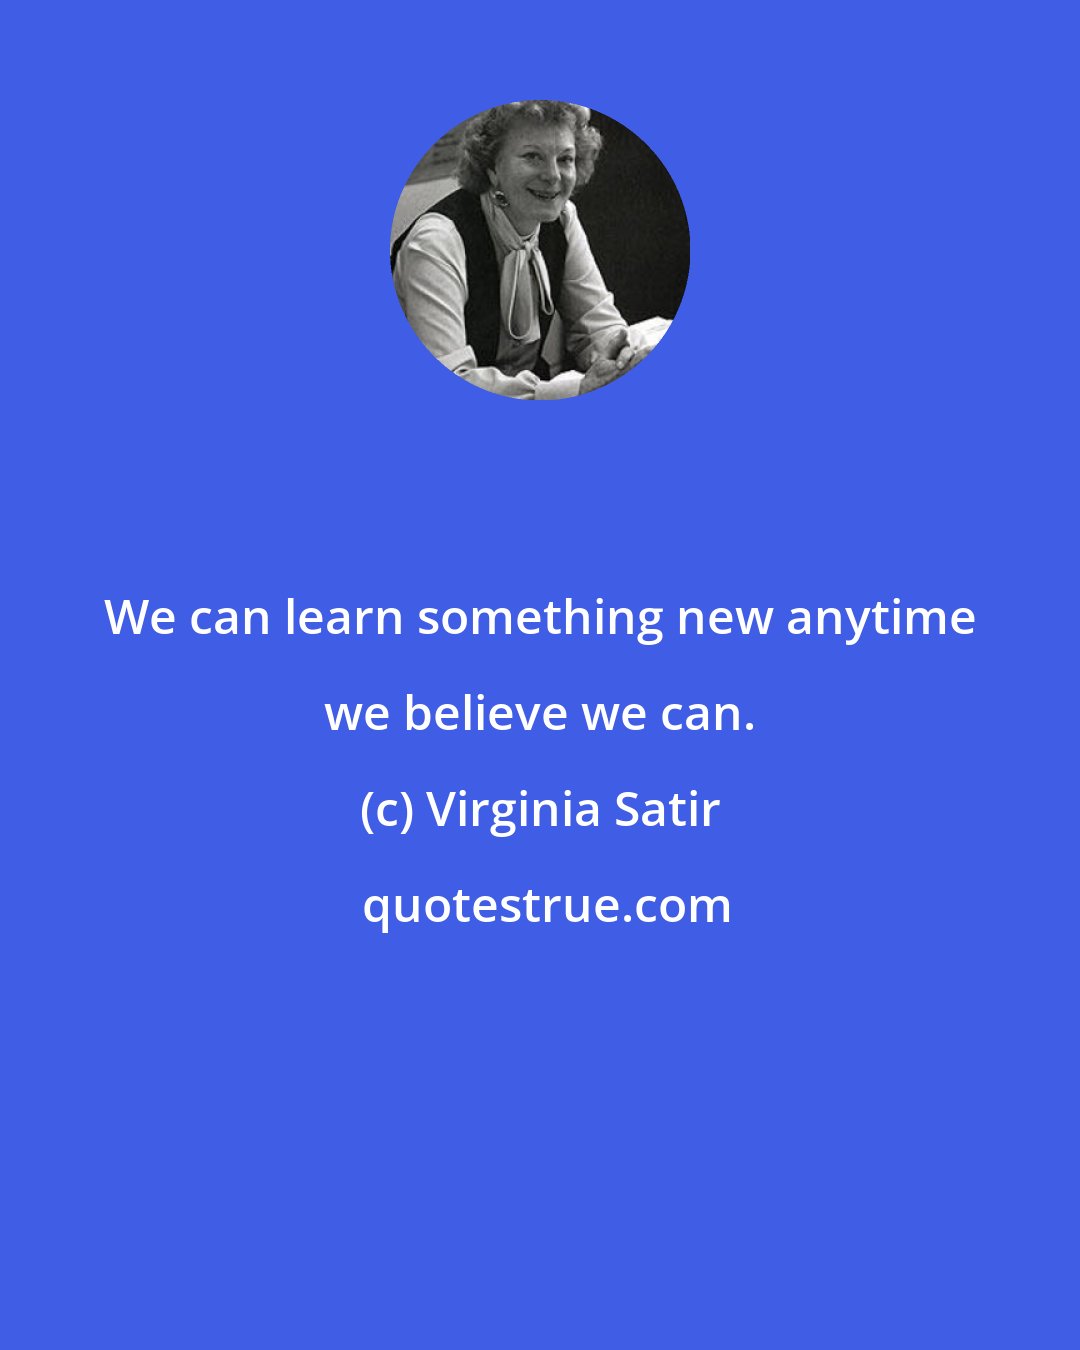 Virginia Satir: We can learn something new anytime we believe we can.